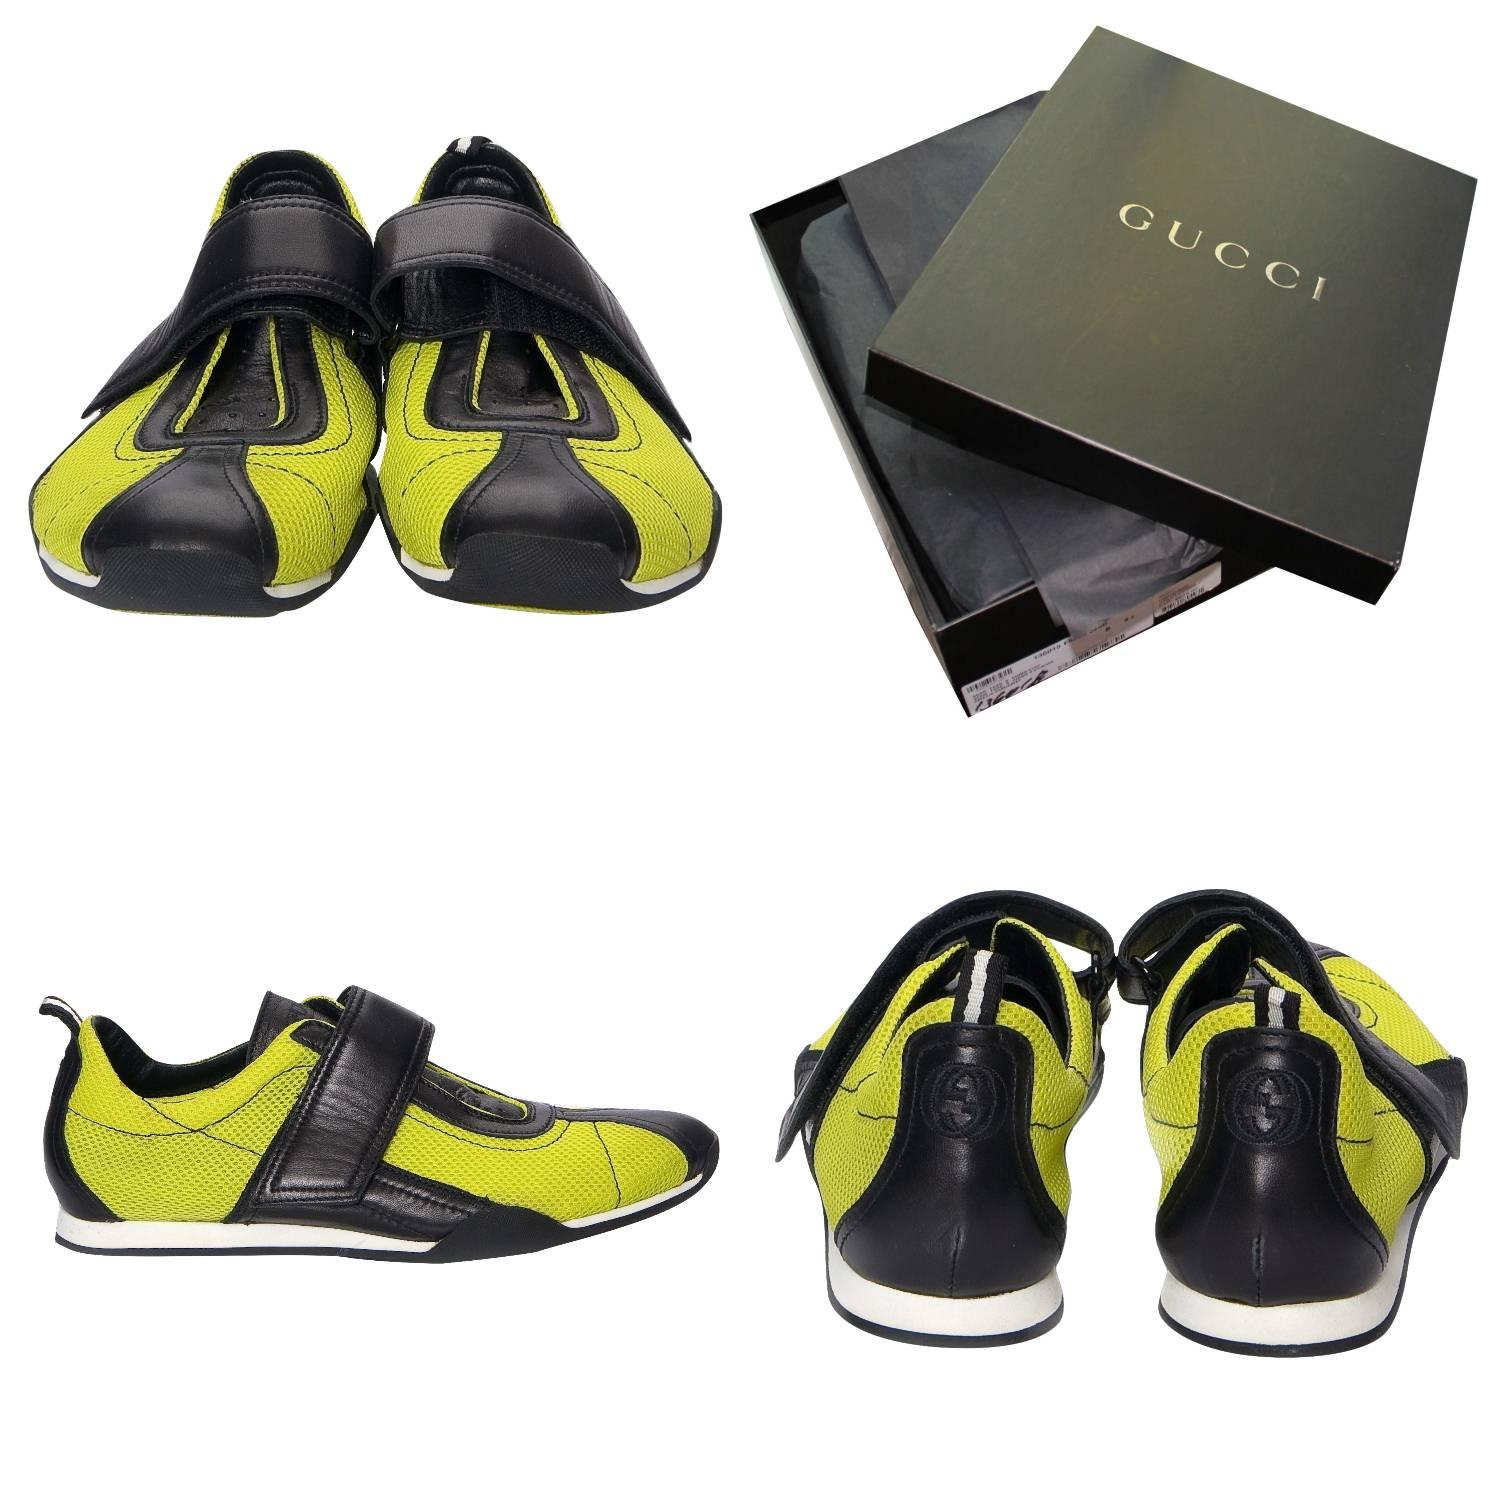 Gucci Mesh Leather Sneakers
Brand New
Leather Insole
Lime Green Mesh 
U.S. Size: 7.5
Leather Velcro Closure
GG logo on Back
Leather Accents 
Comes with Box & Dust Cover
Tom Ford Era!